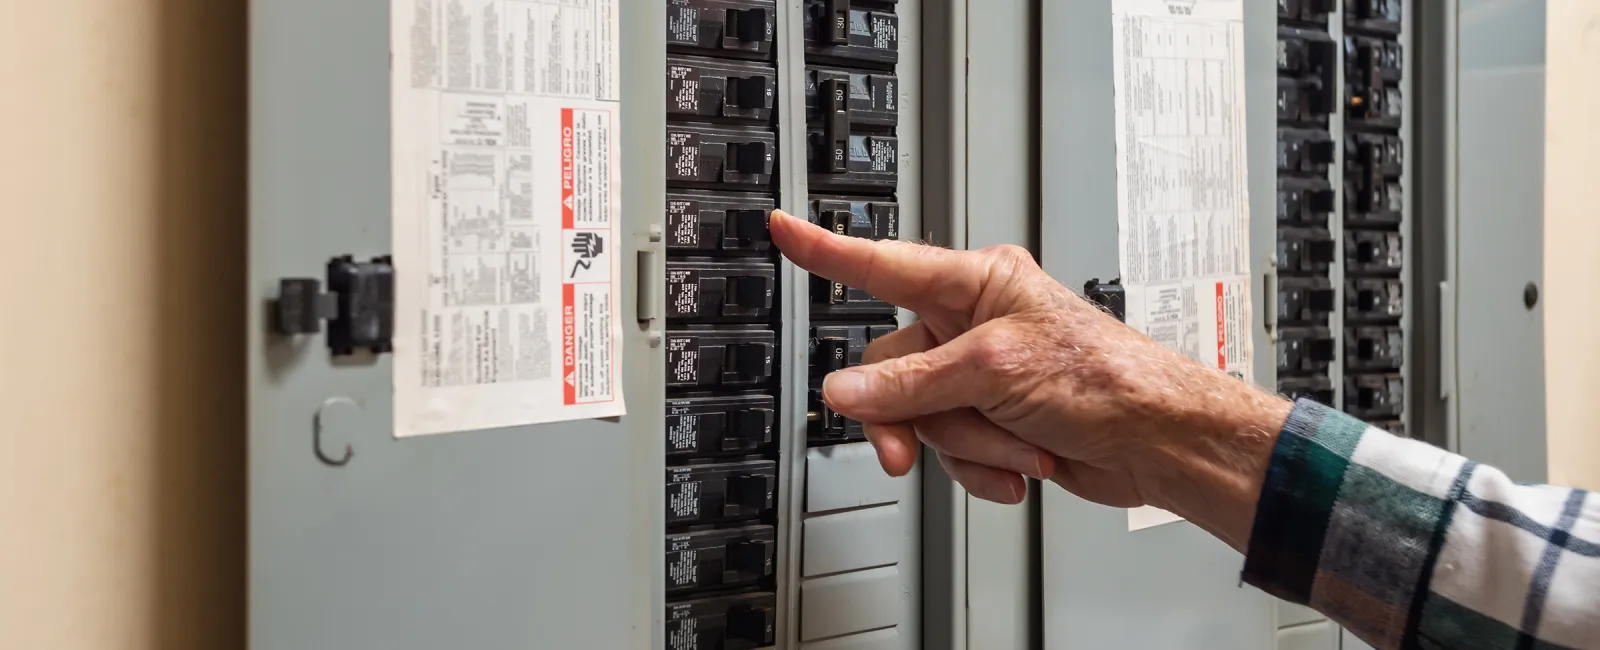 a person standing in front of a electrical panel